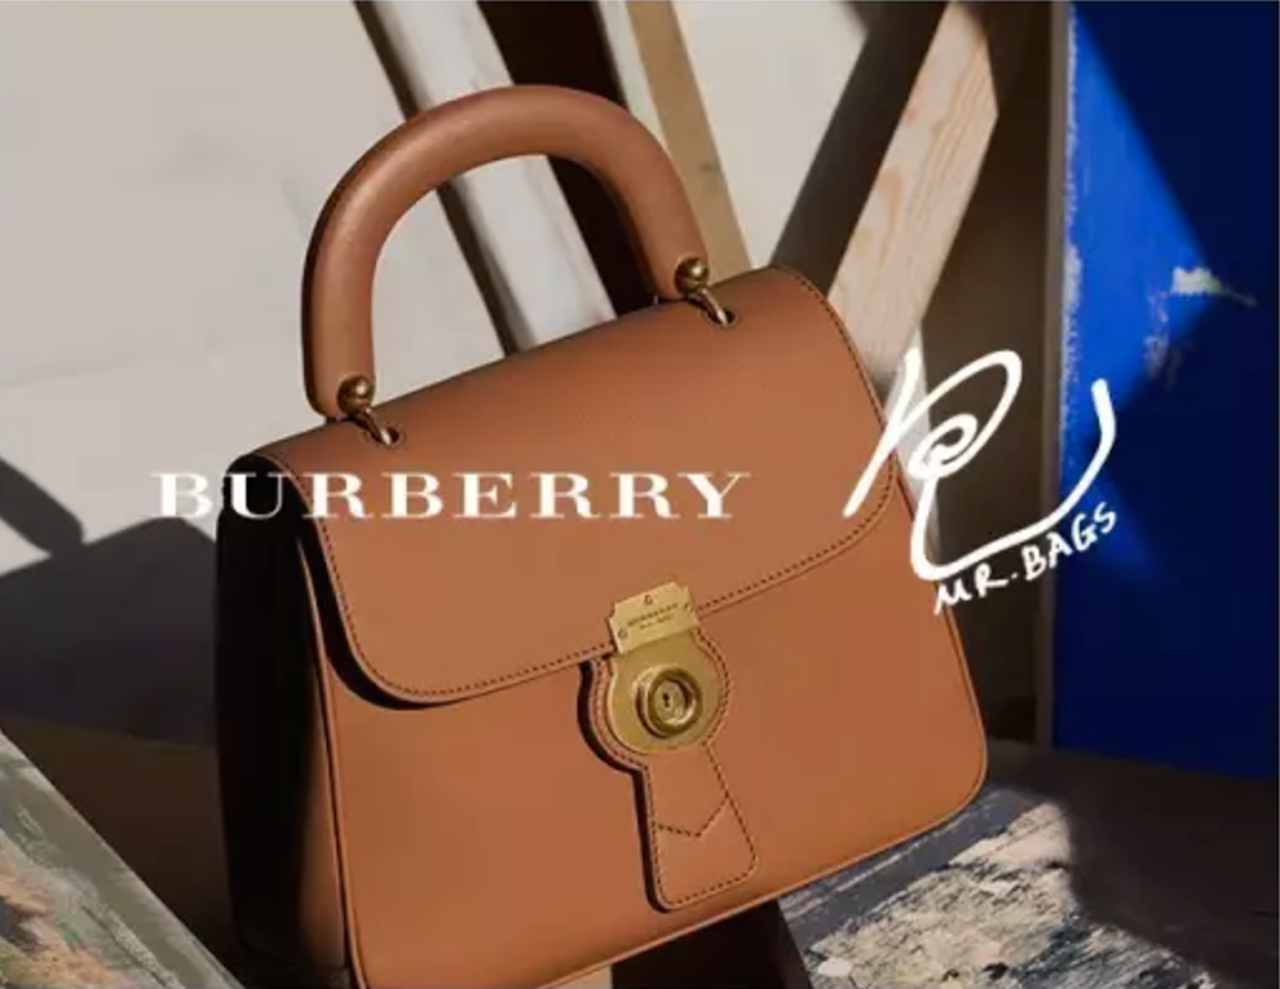 China Continues to Drive Burberry’s Growth